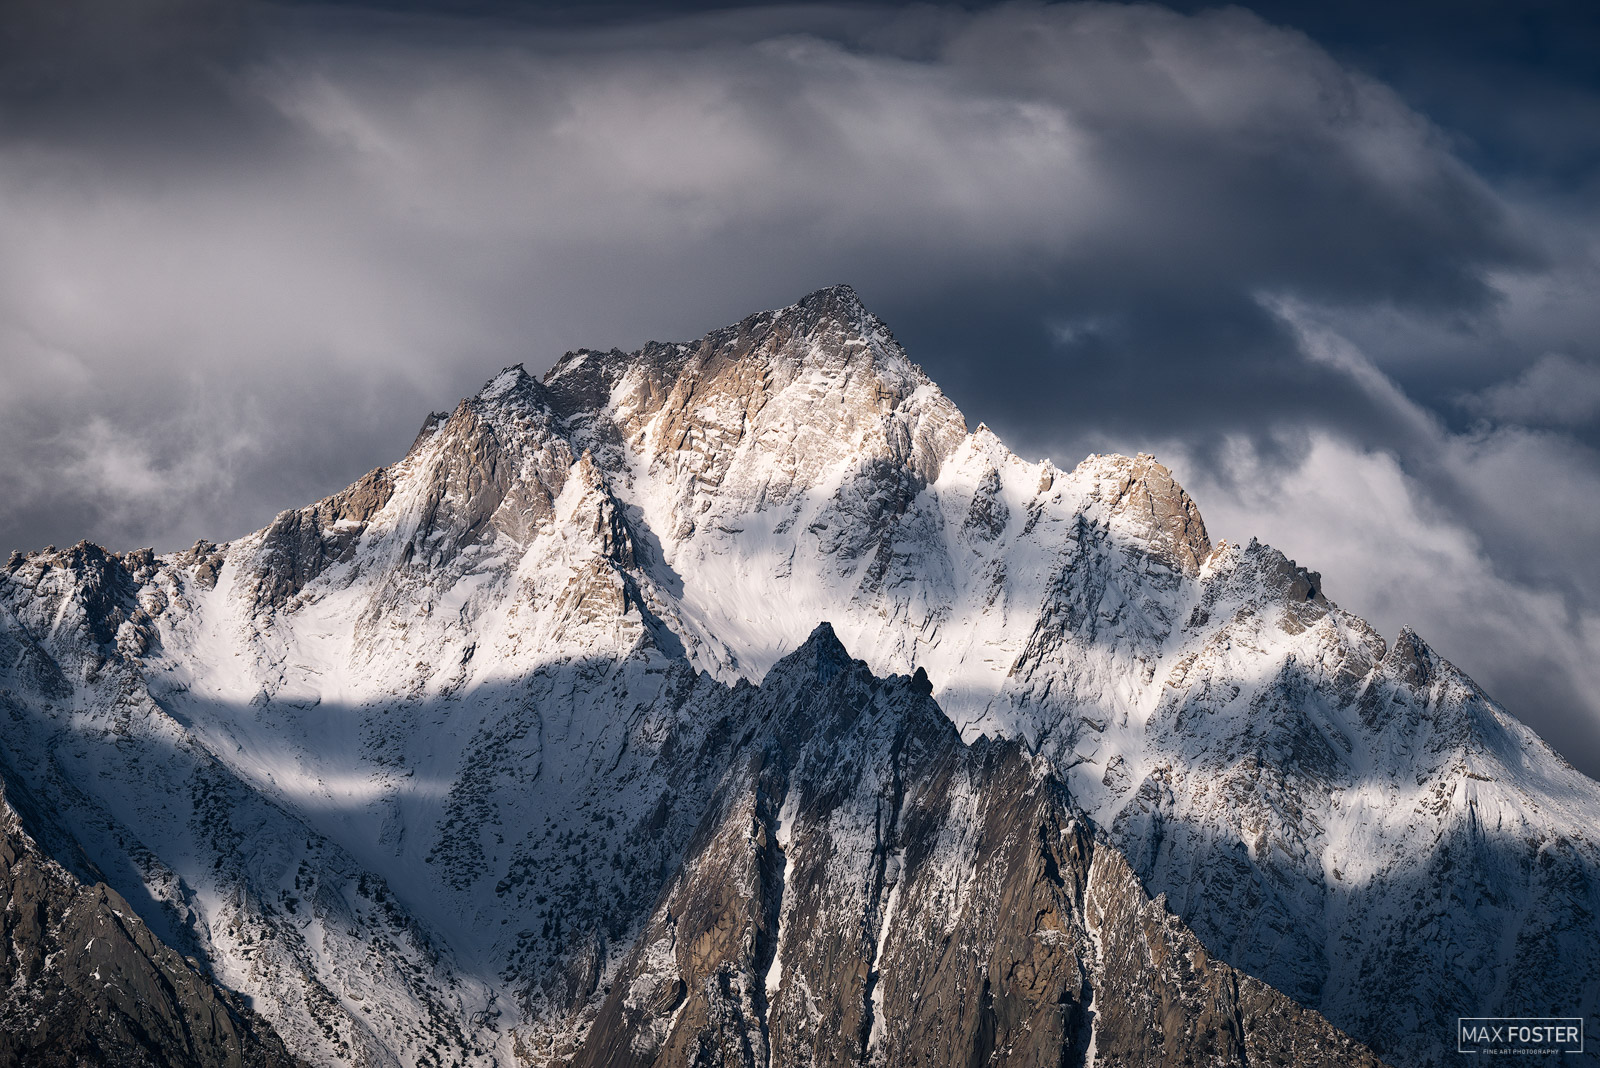 Bring your walls to life with Dressed In White, Max Foster's limited edition photography print of Lone Pine Peak in California...